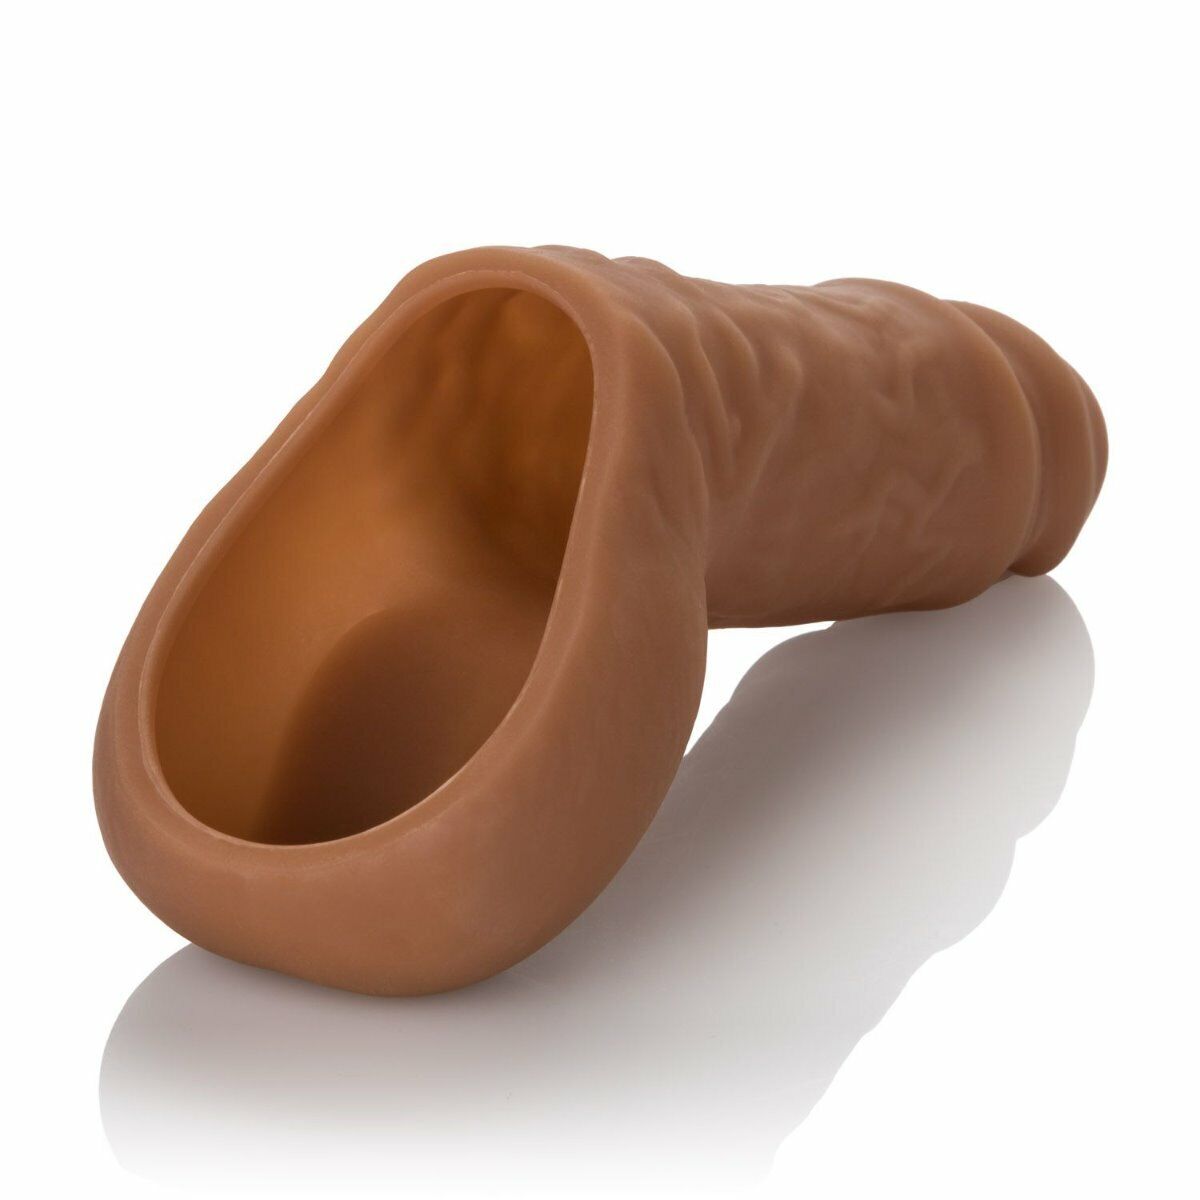 Soft Silicone Black Hollow Stand to Pee FTM STP Packer Gear Penis